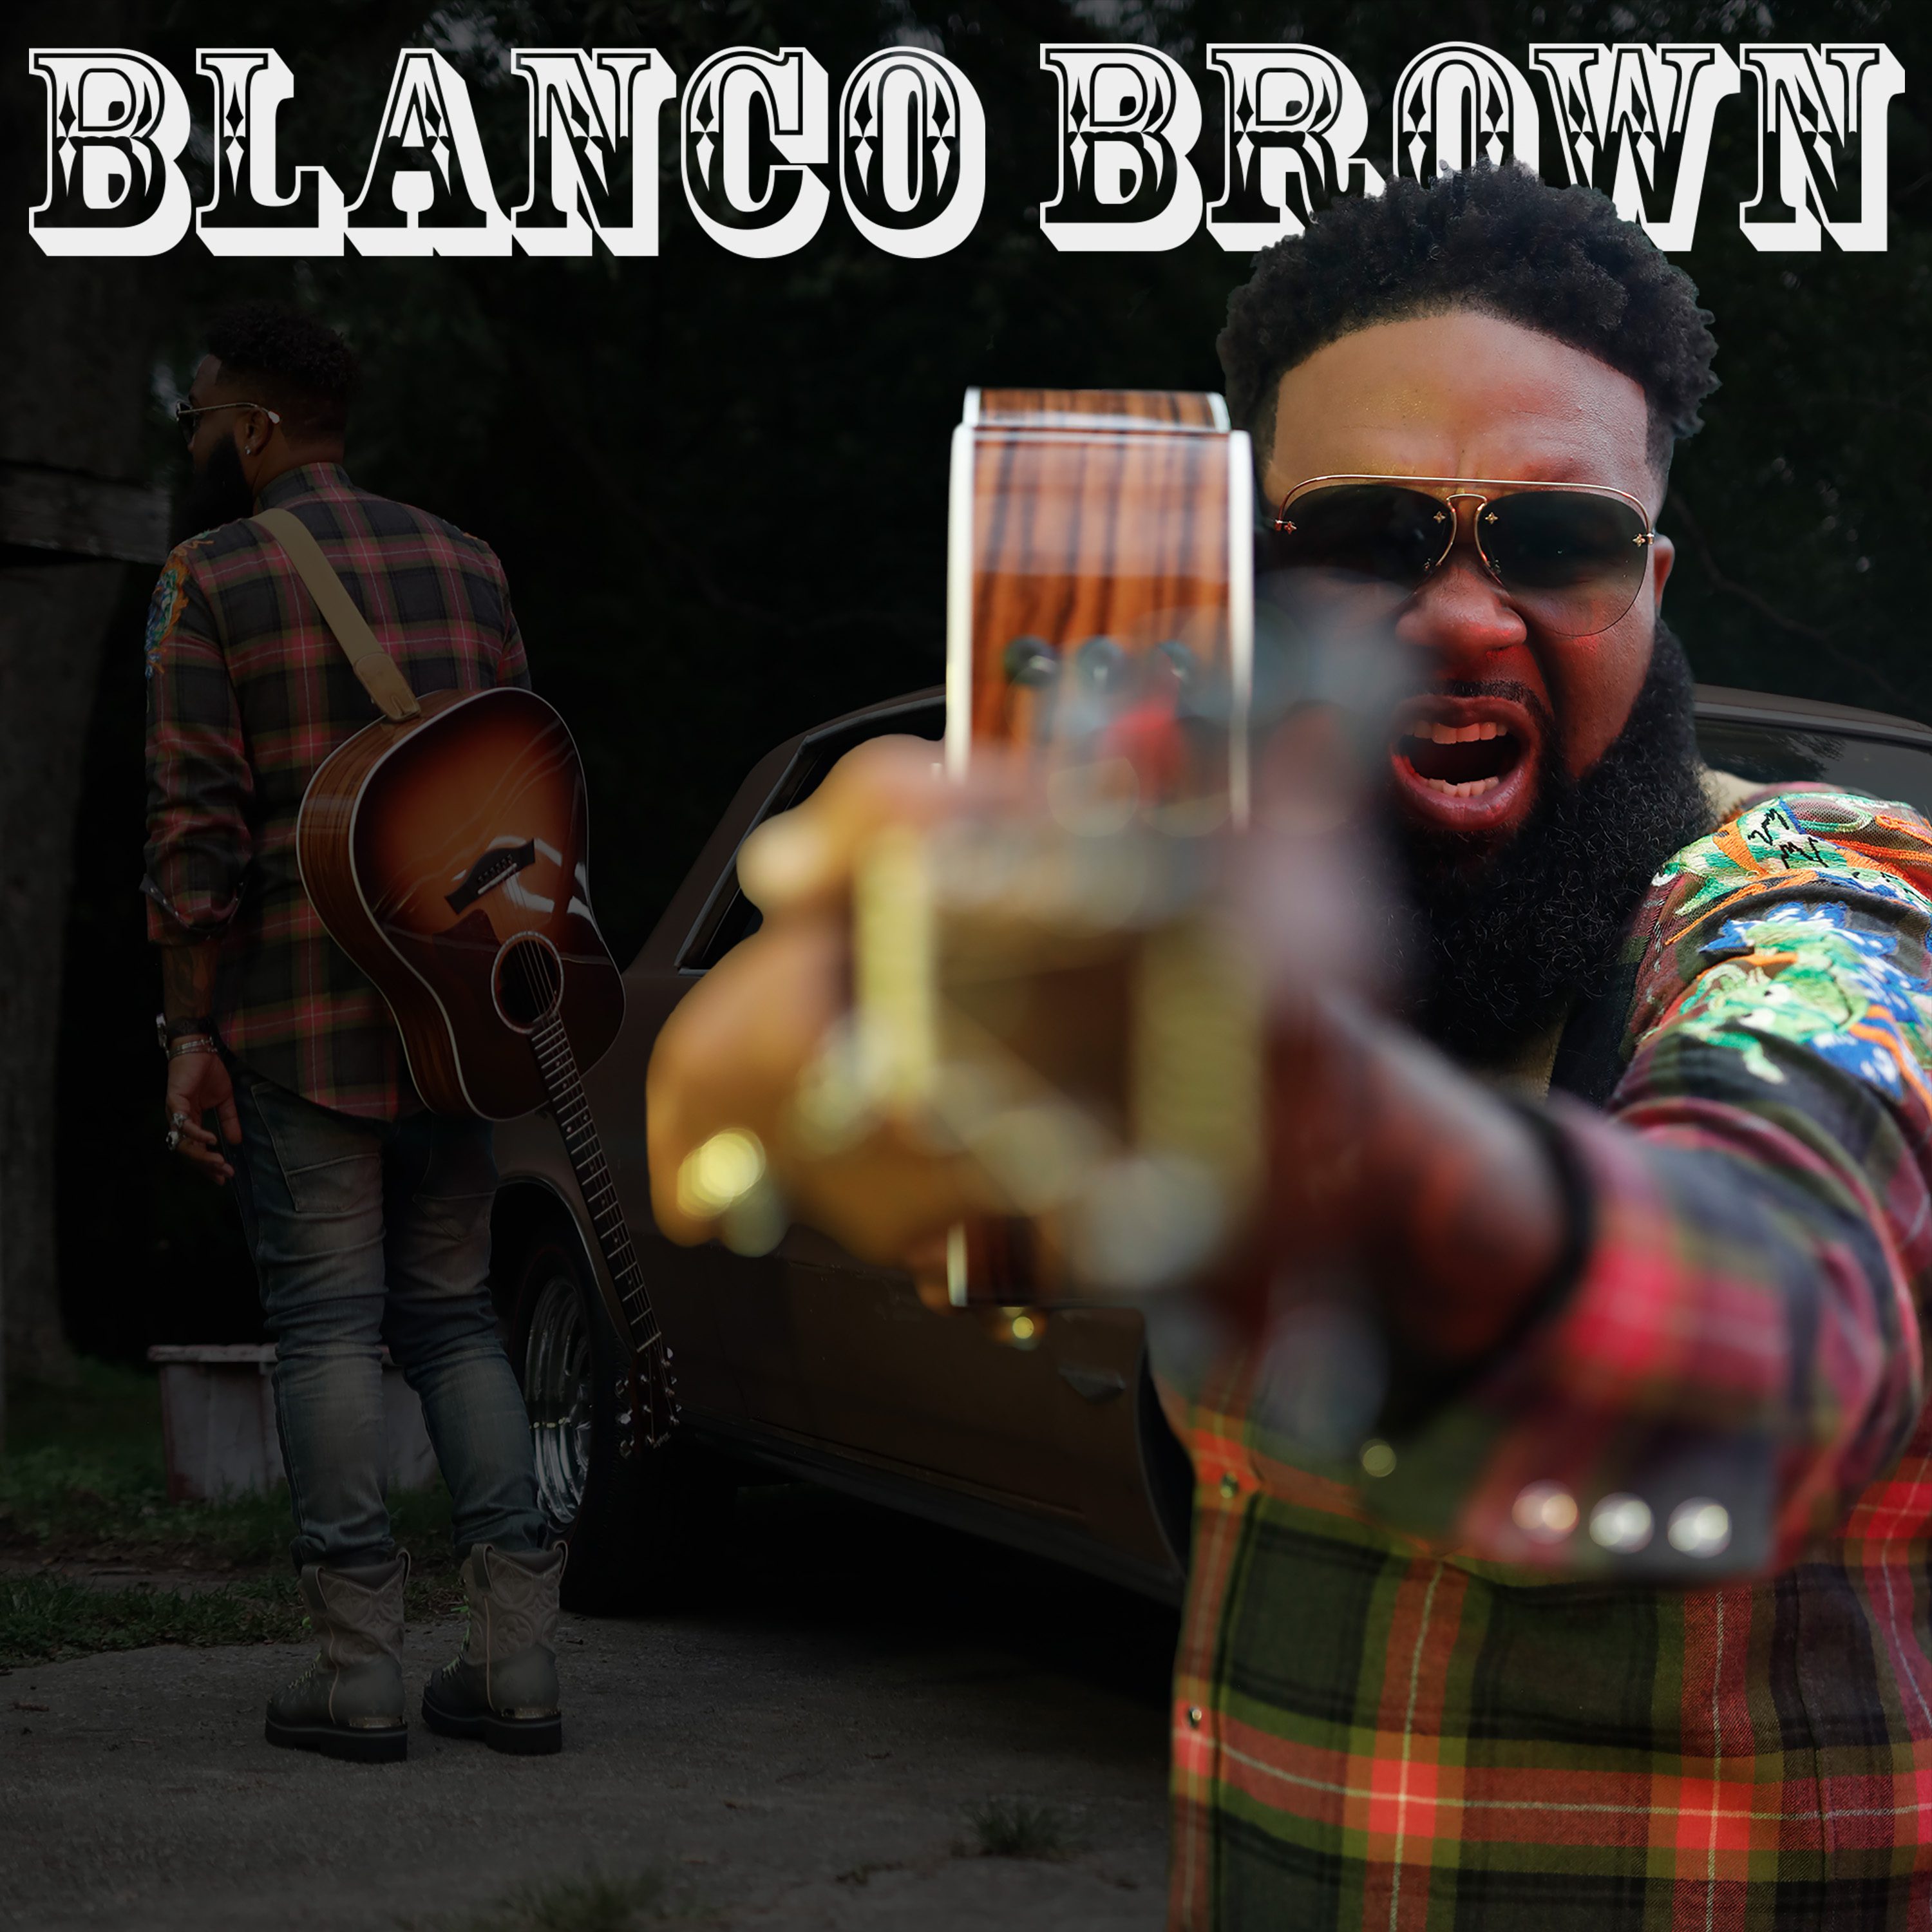 Singer Blanco Brown undergoes surgery after head-on crash